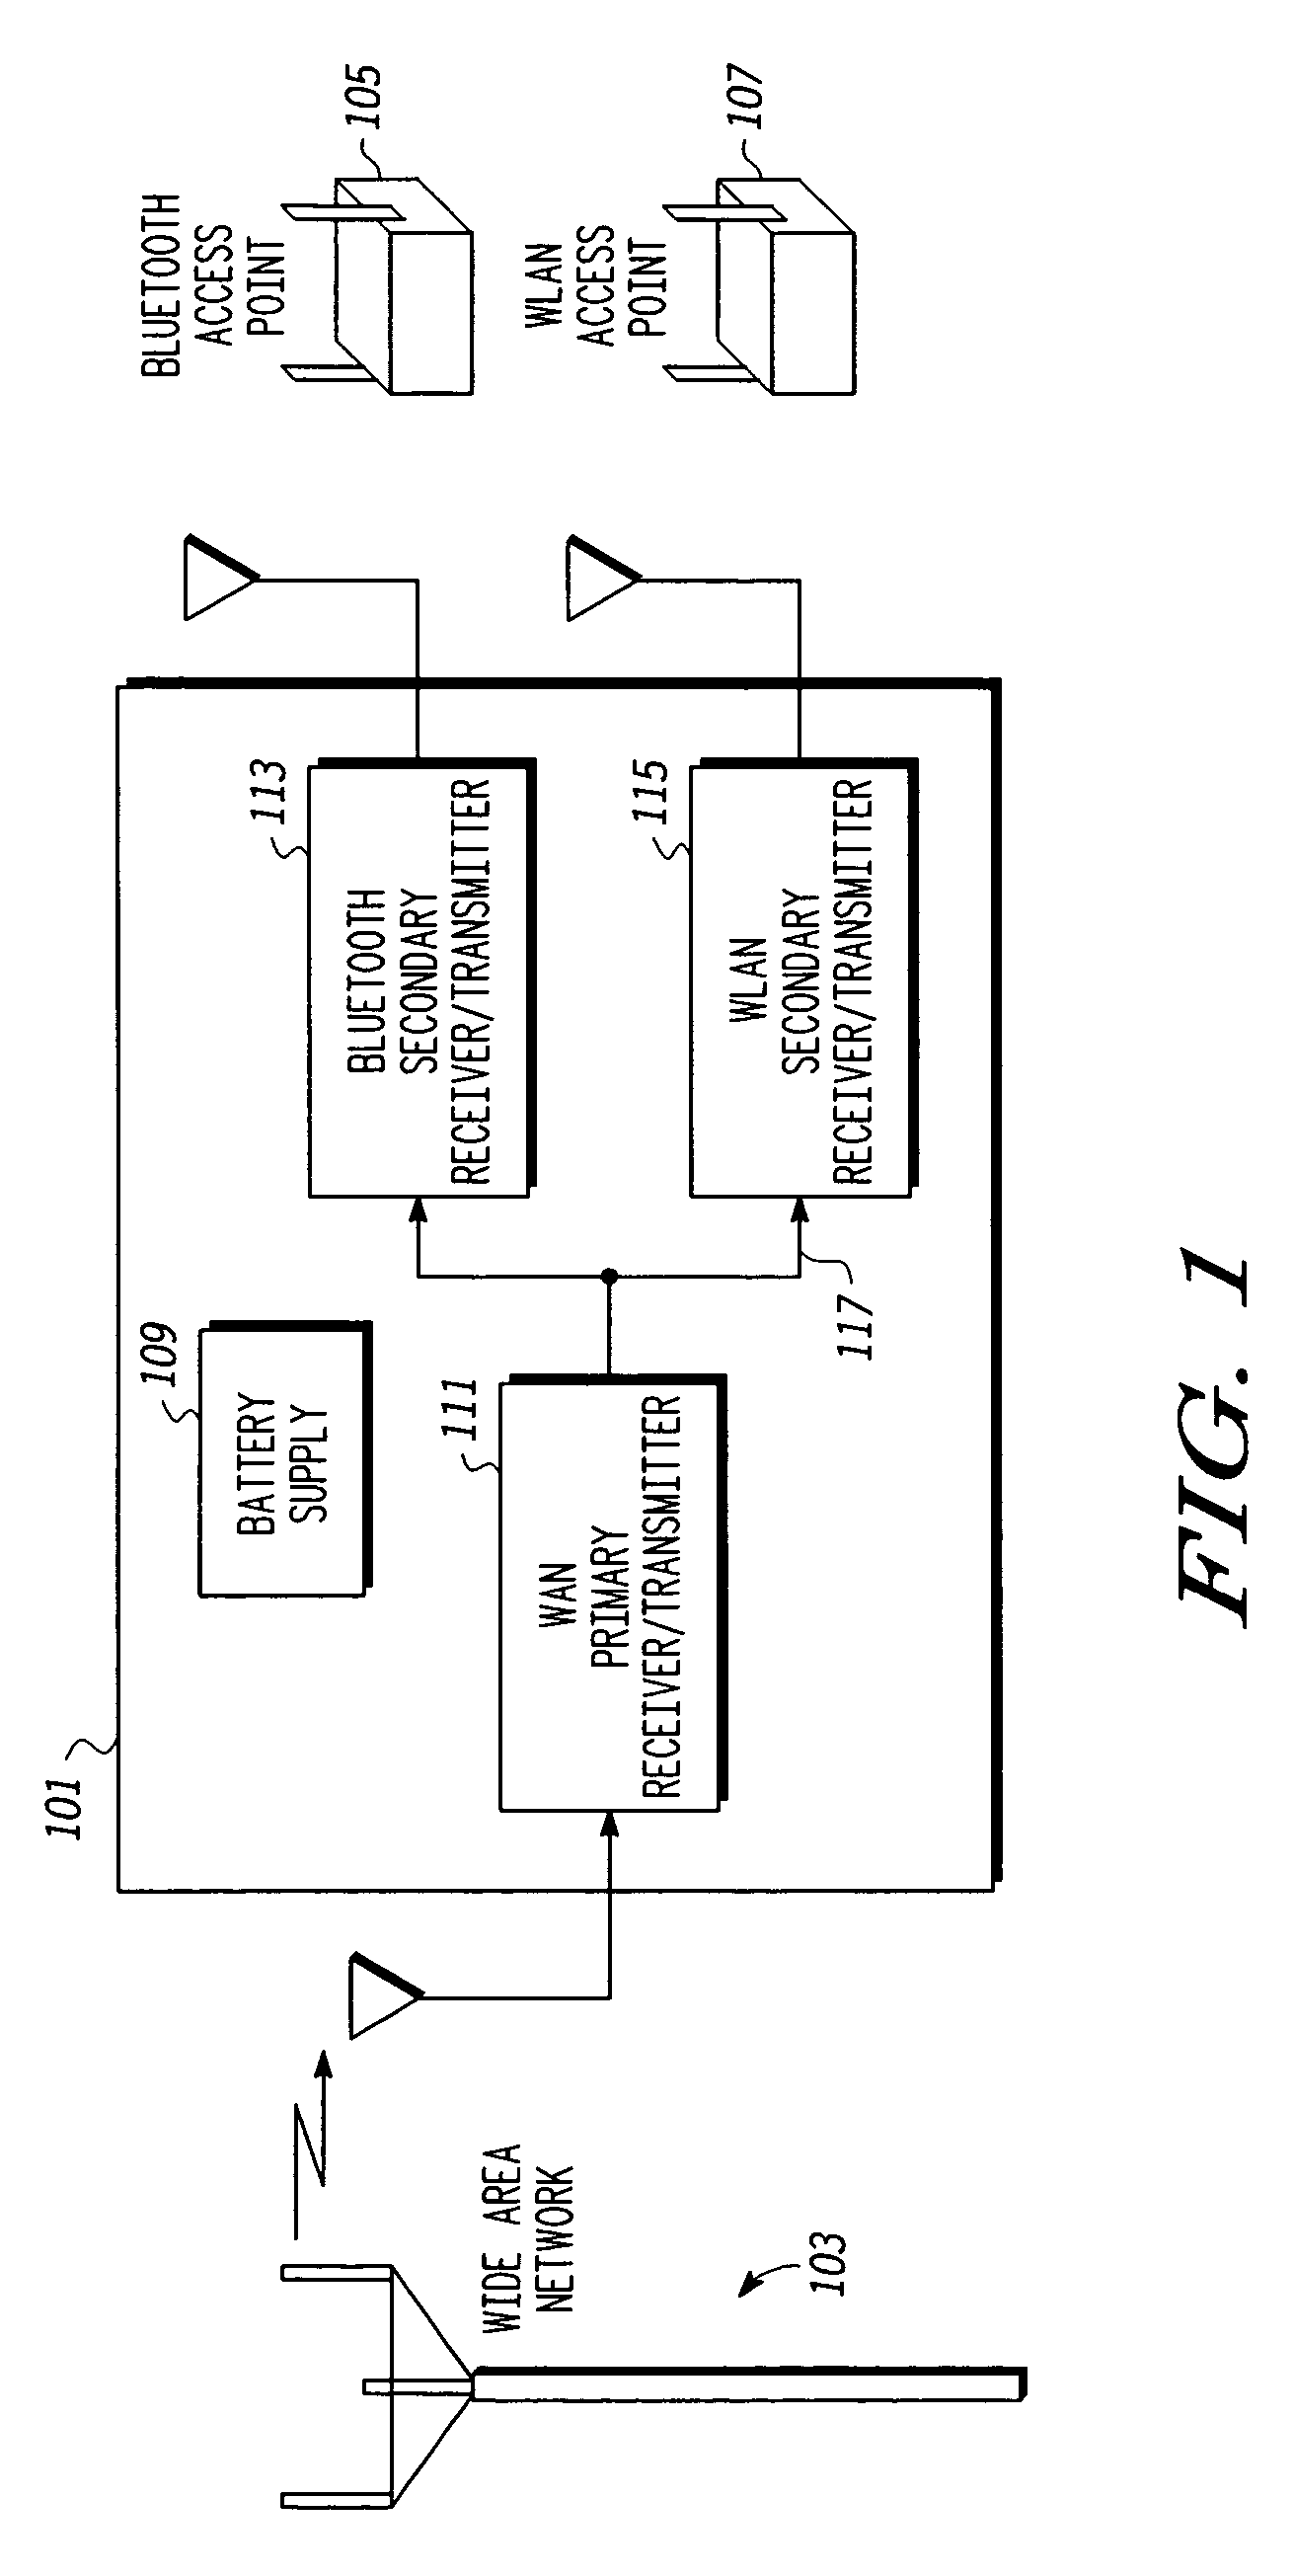 Extending battery life in communication devices having a plurality of receivers